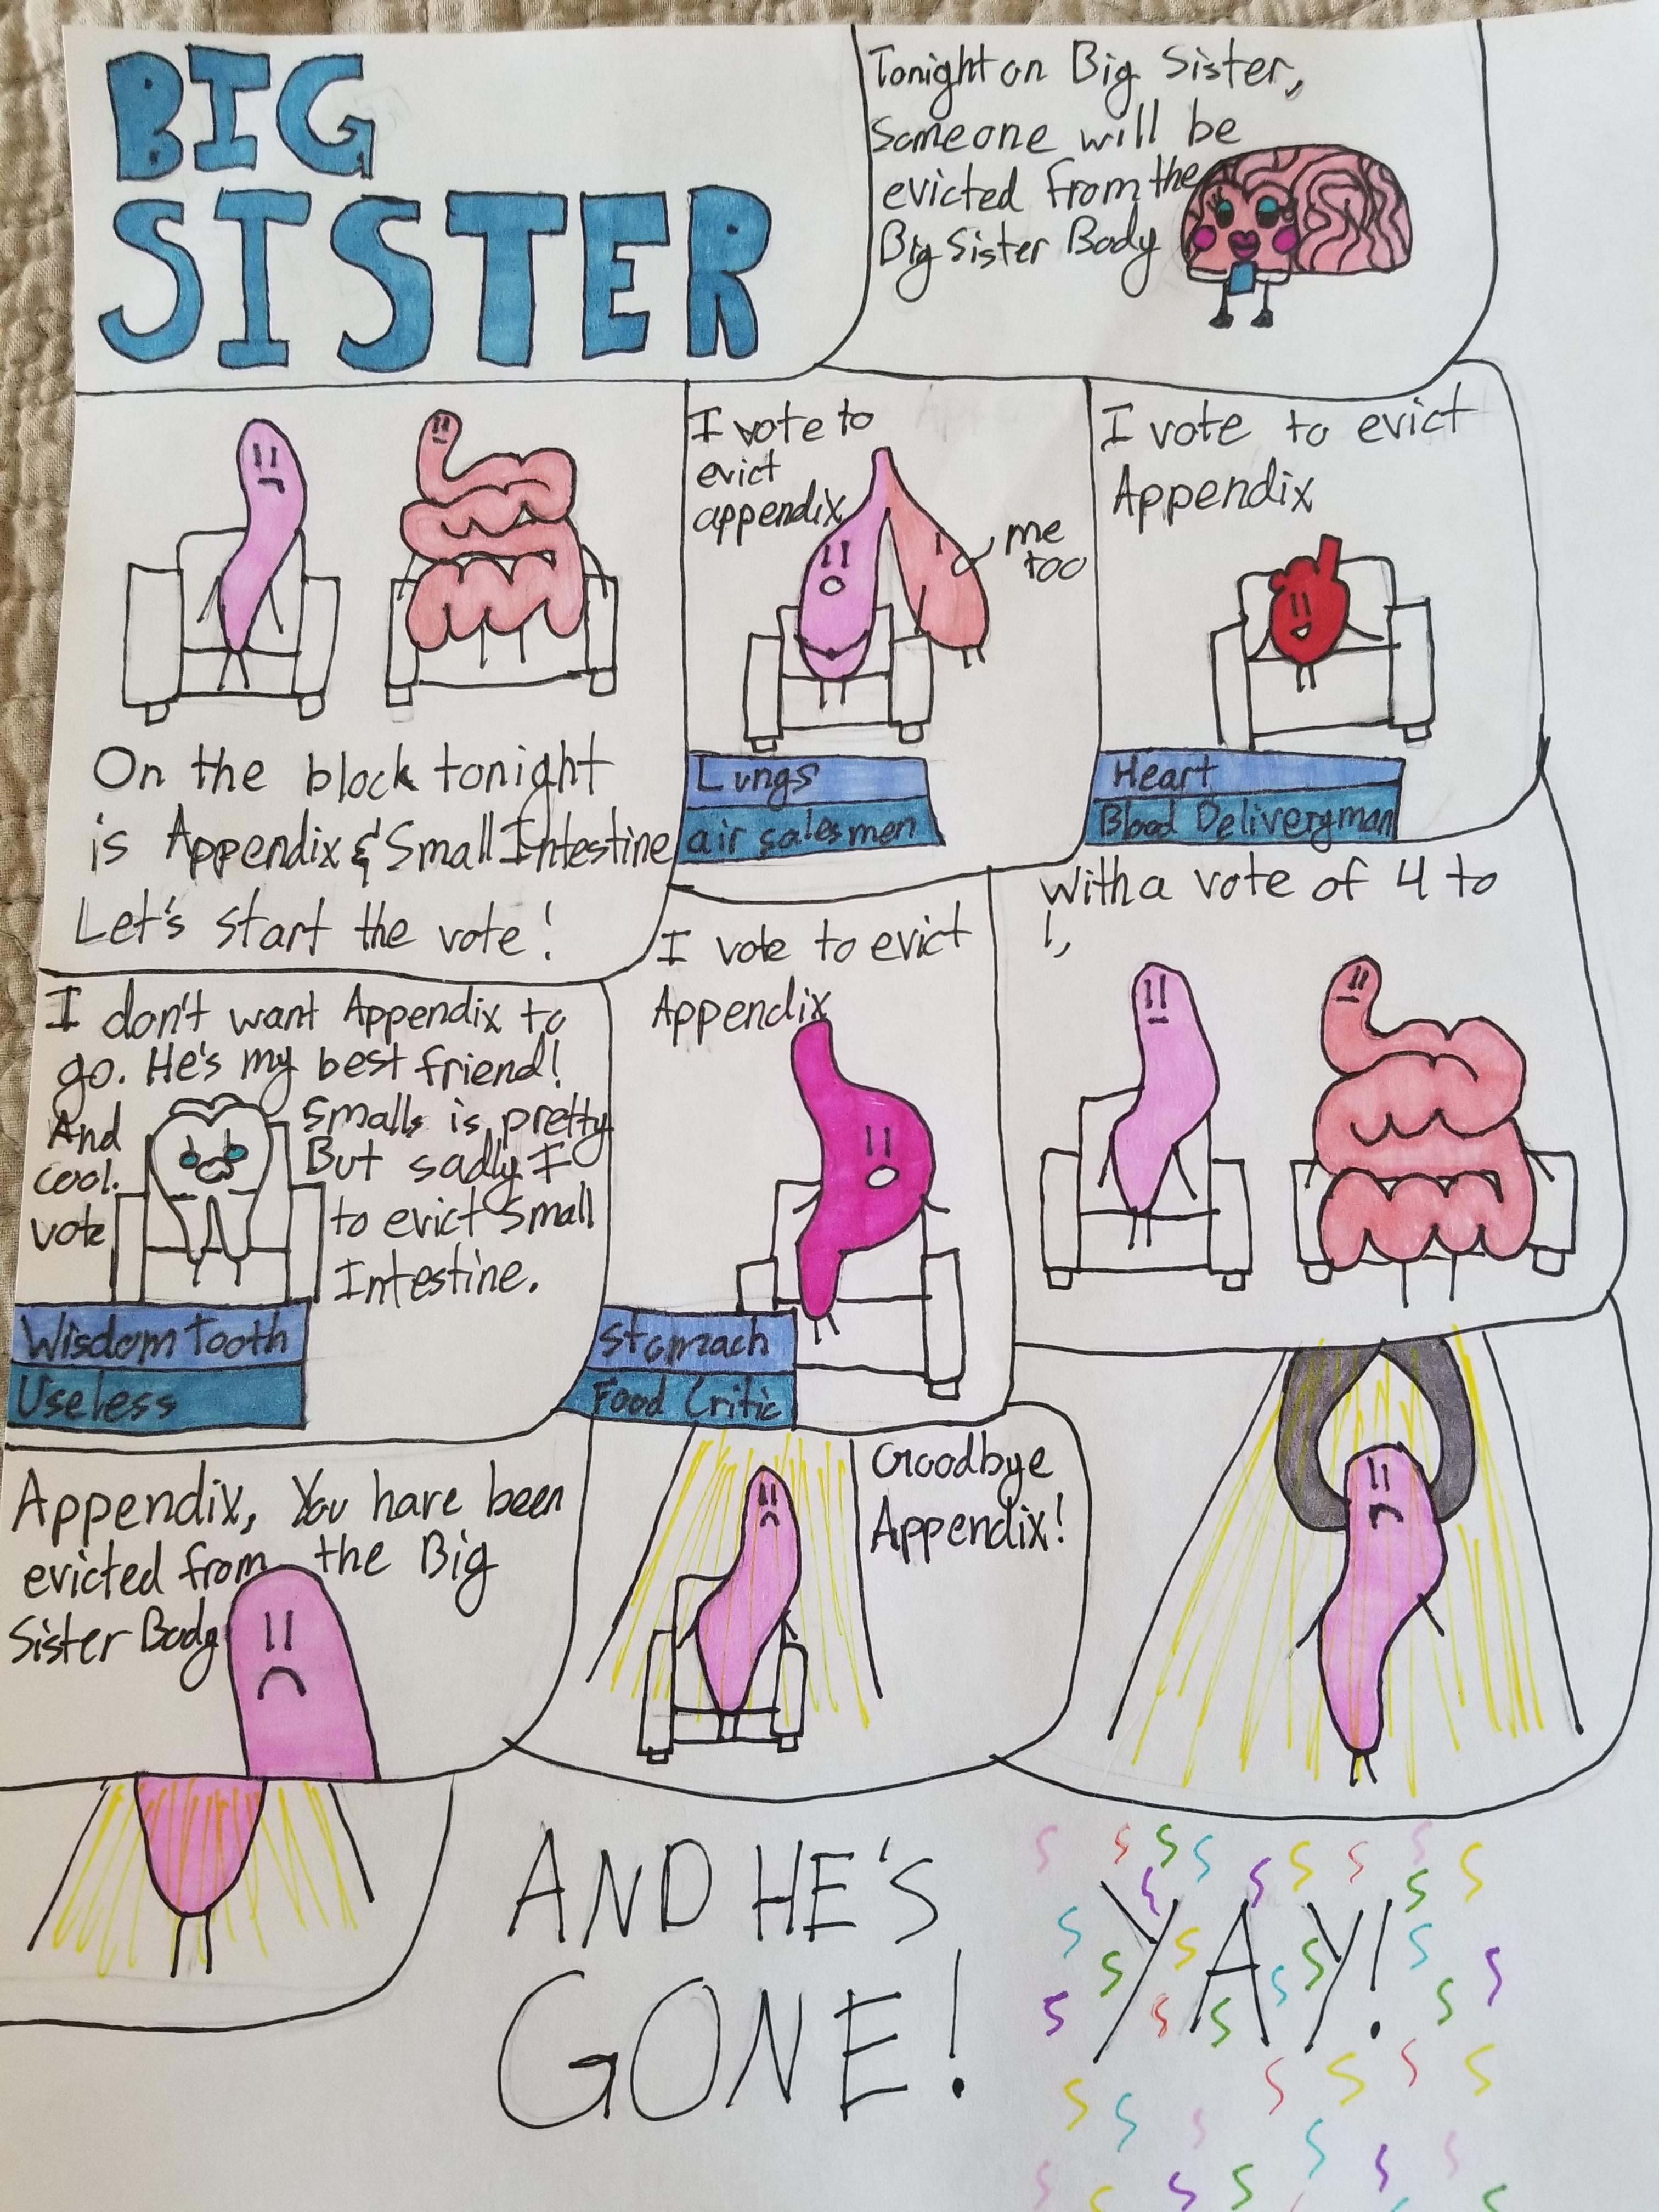 My daughter, who made me the"Pancreas Get Well Soon" card, made a comic to say "good-bye" to her appendix